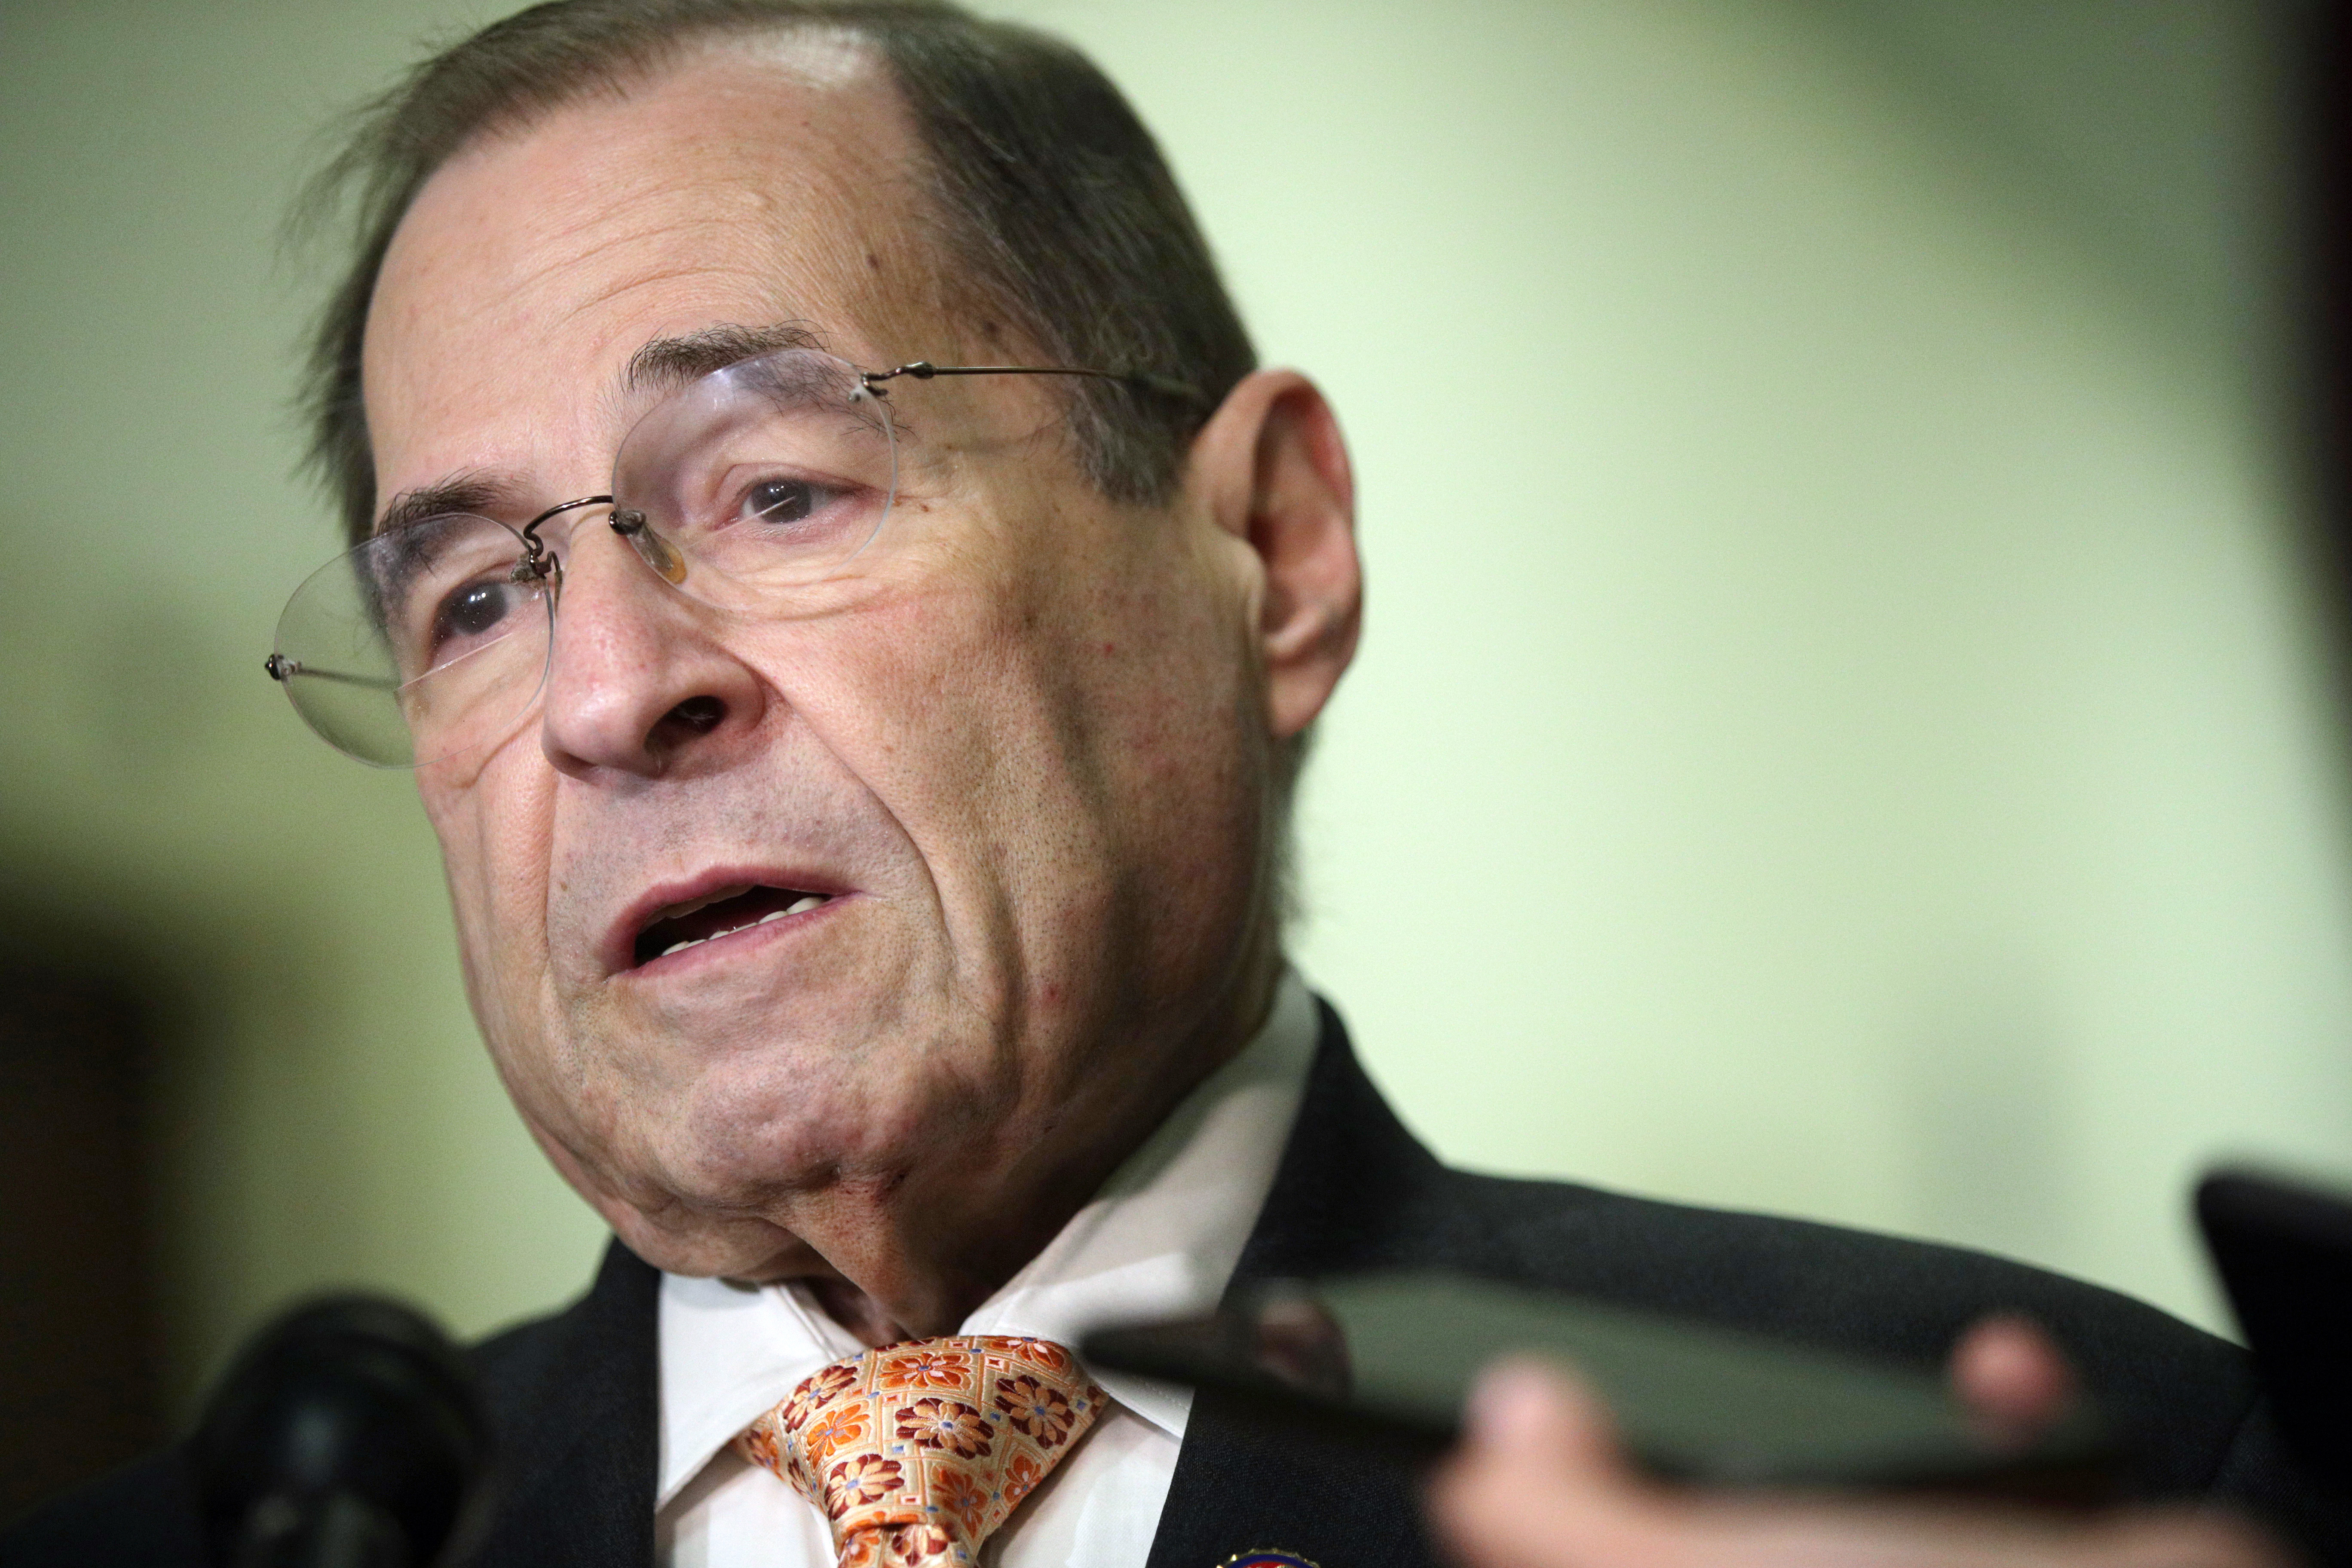 House Judiciary Committee Chairman Rep. Jerry Nadler (D-NY) speaks to members of the media at Rayburn House Office Building on Capitol Hill on June 26, 2019 in Washington, DC.